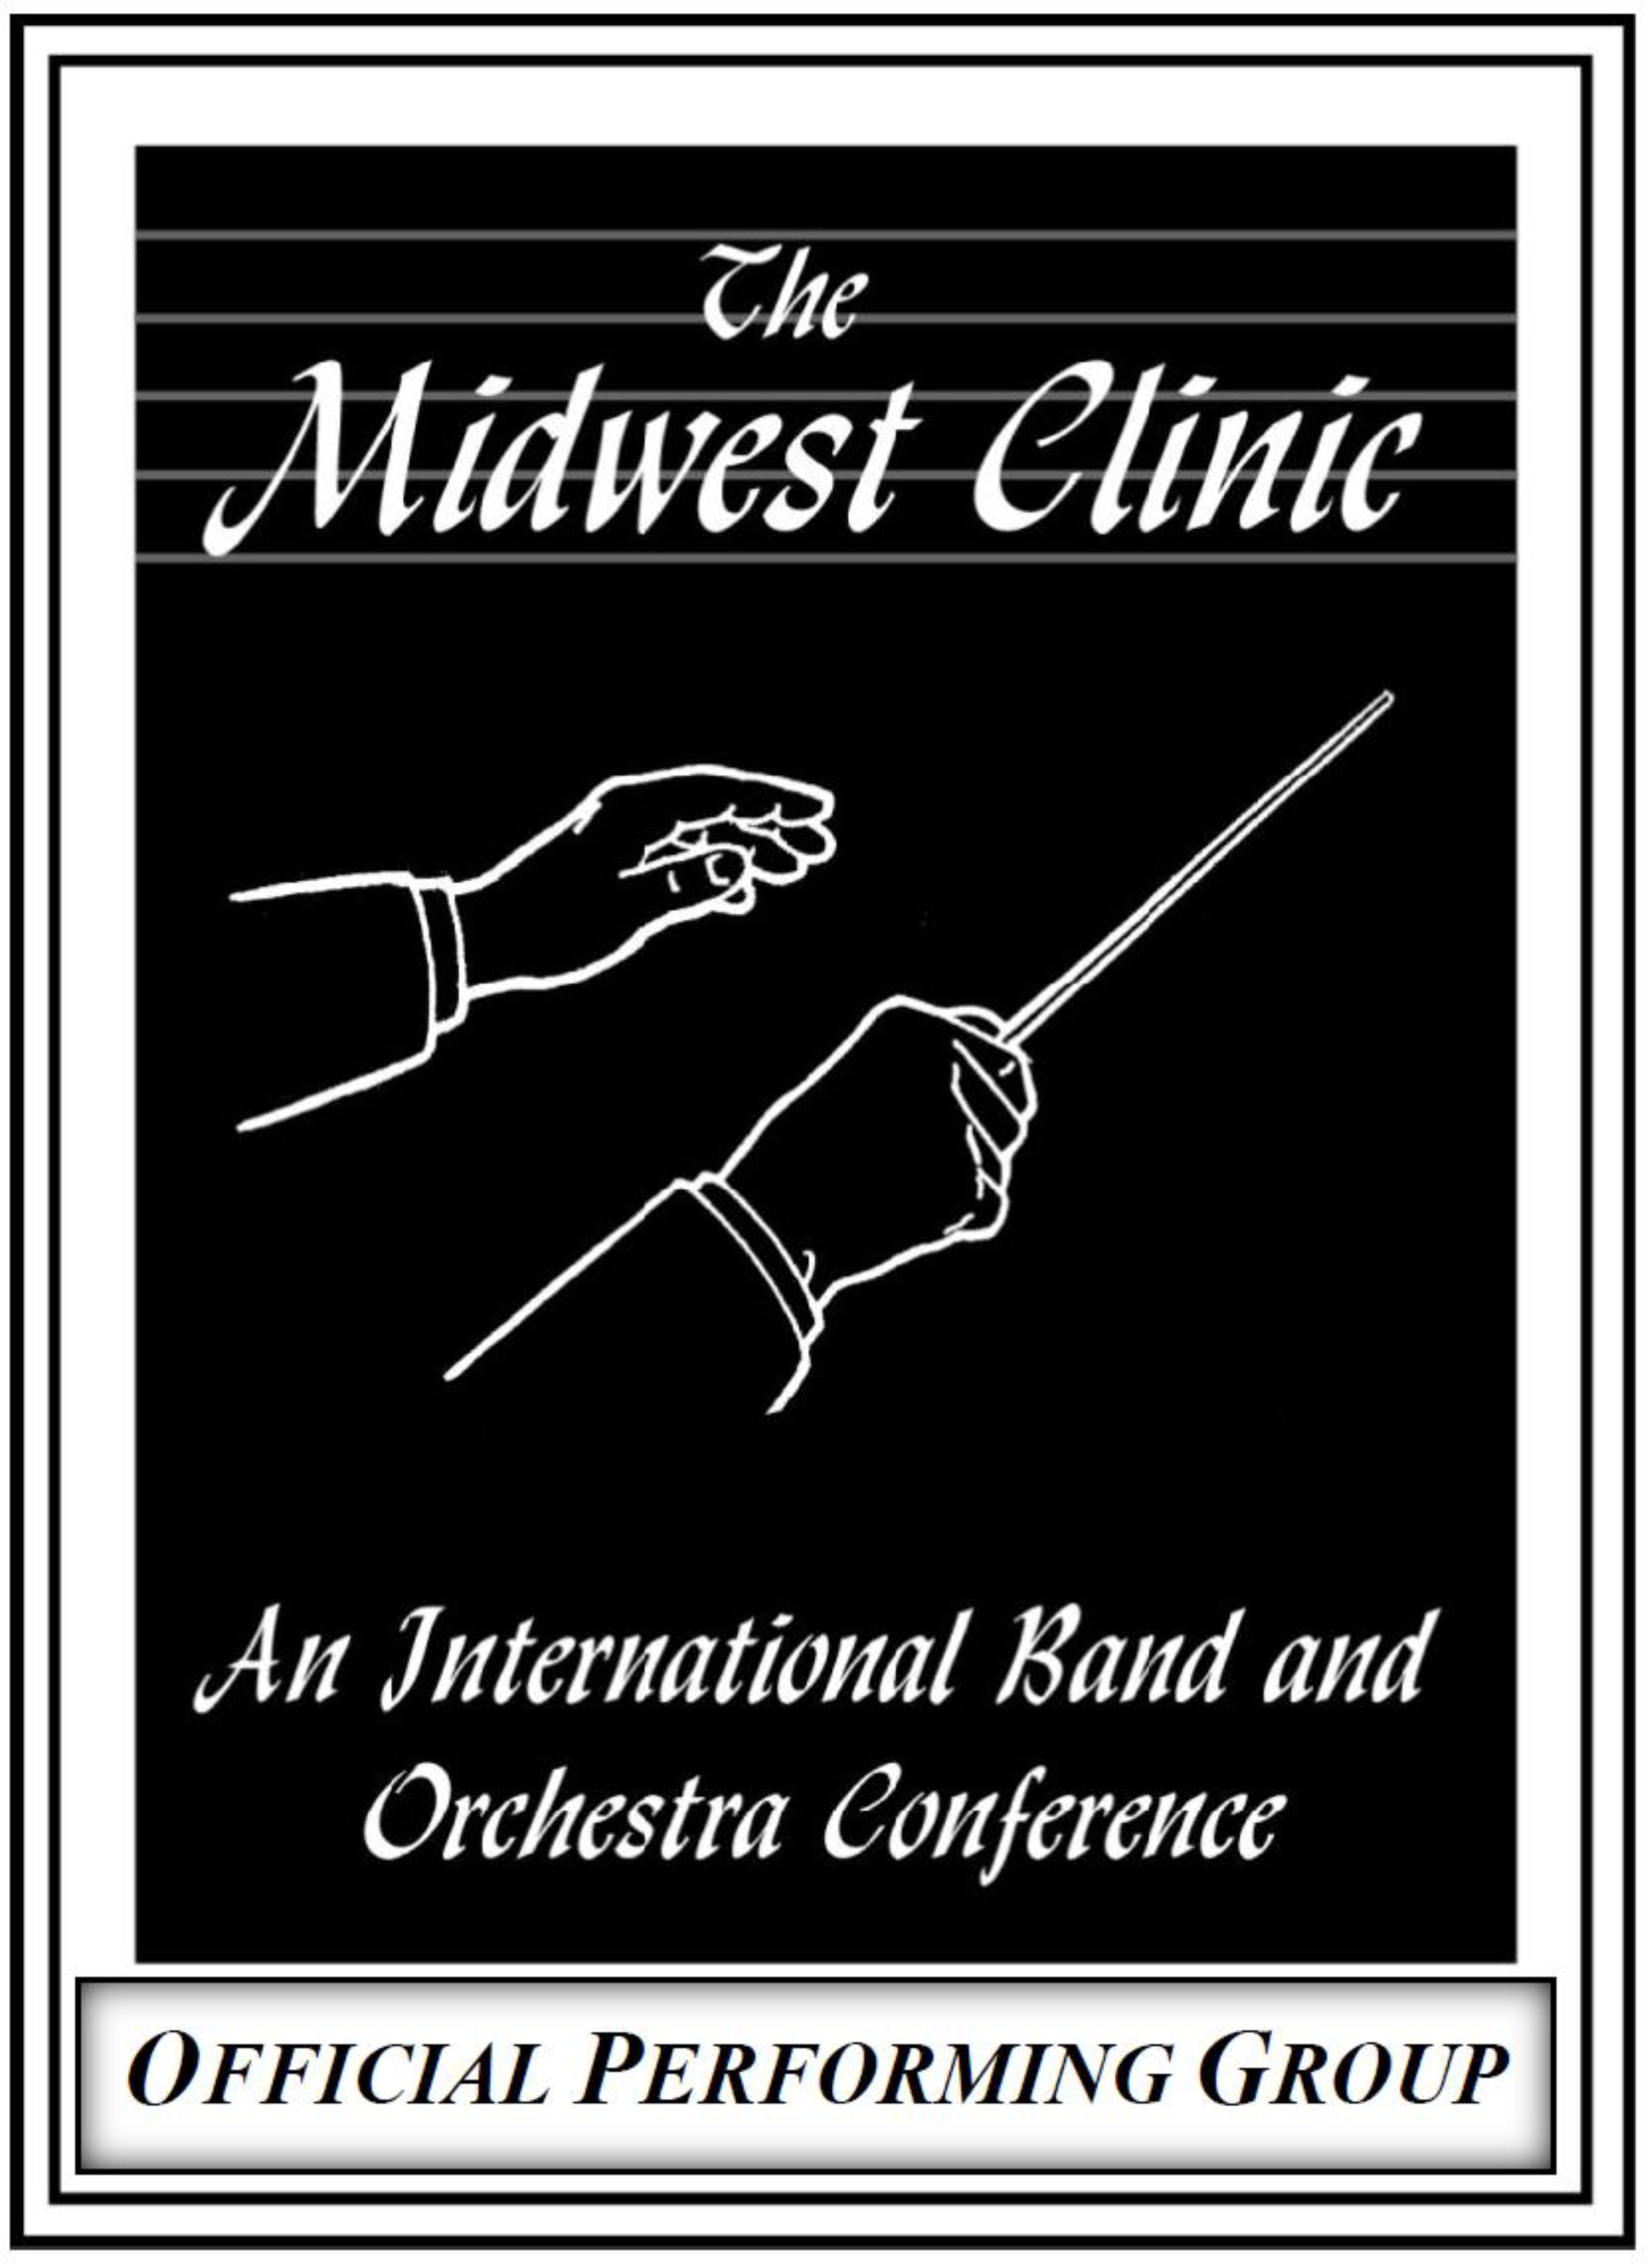 Midwest Conference Logo